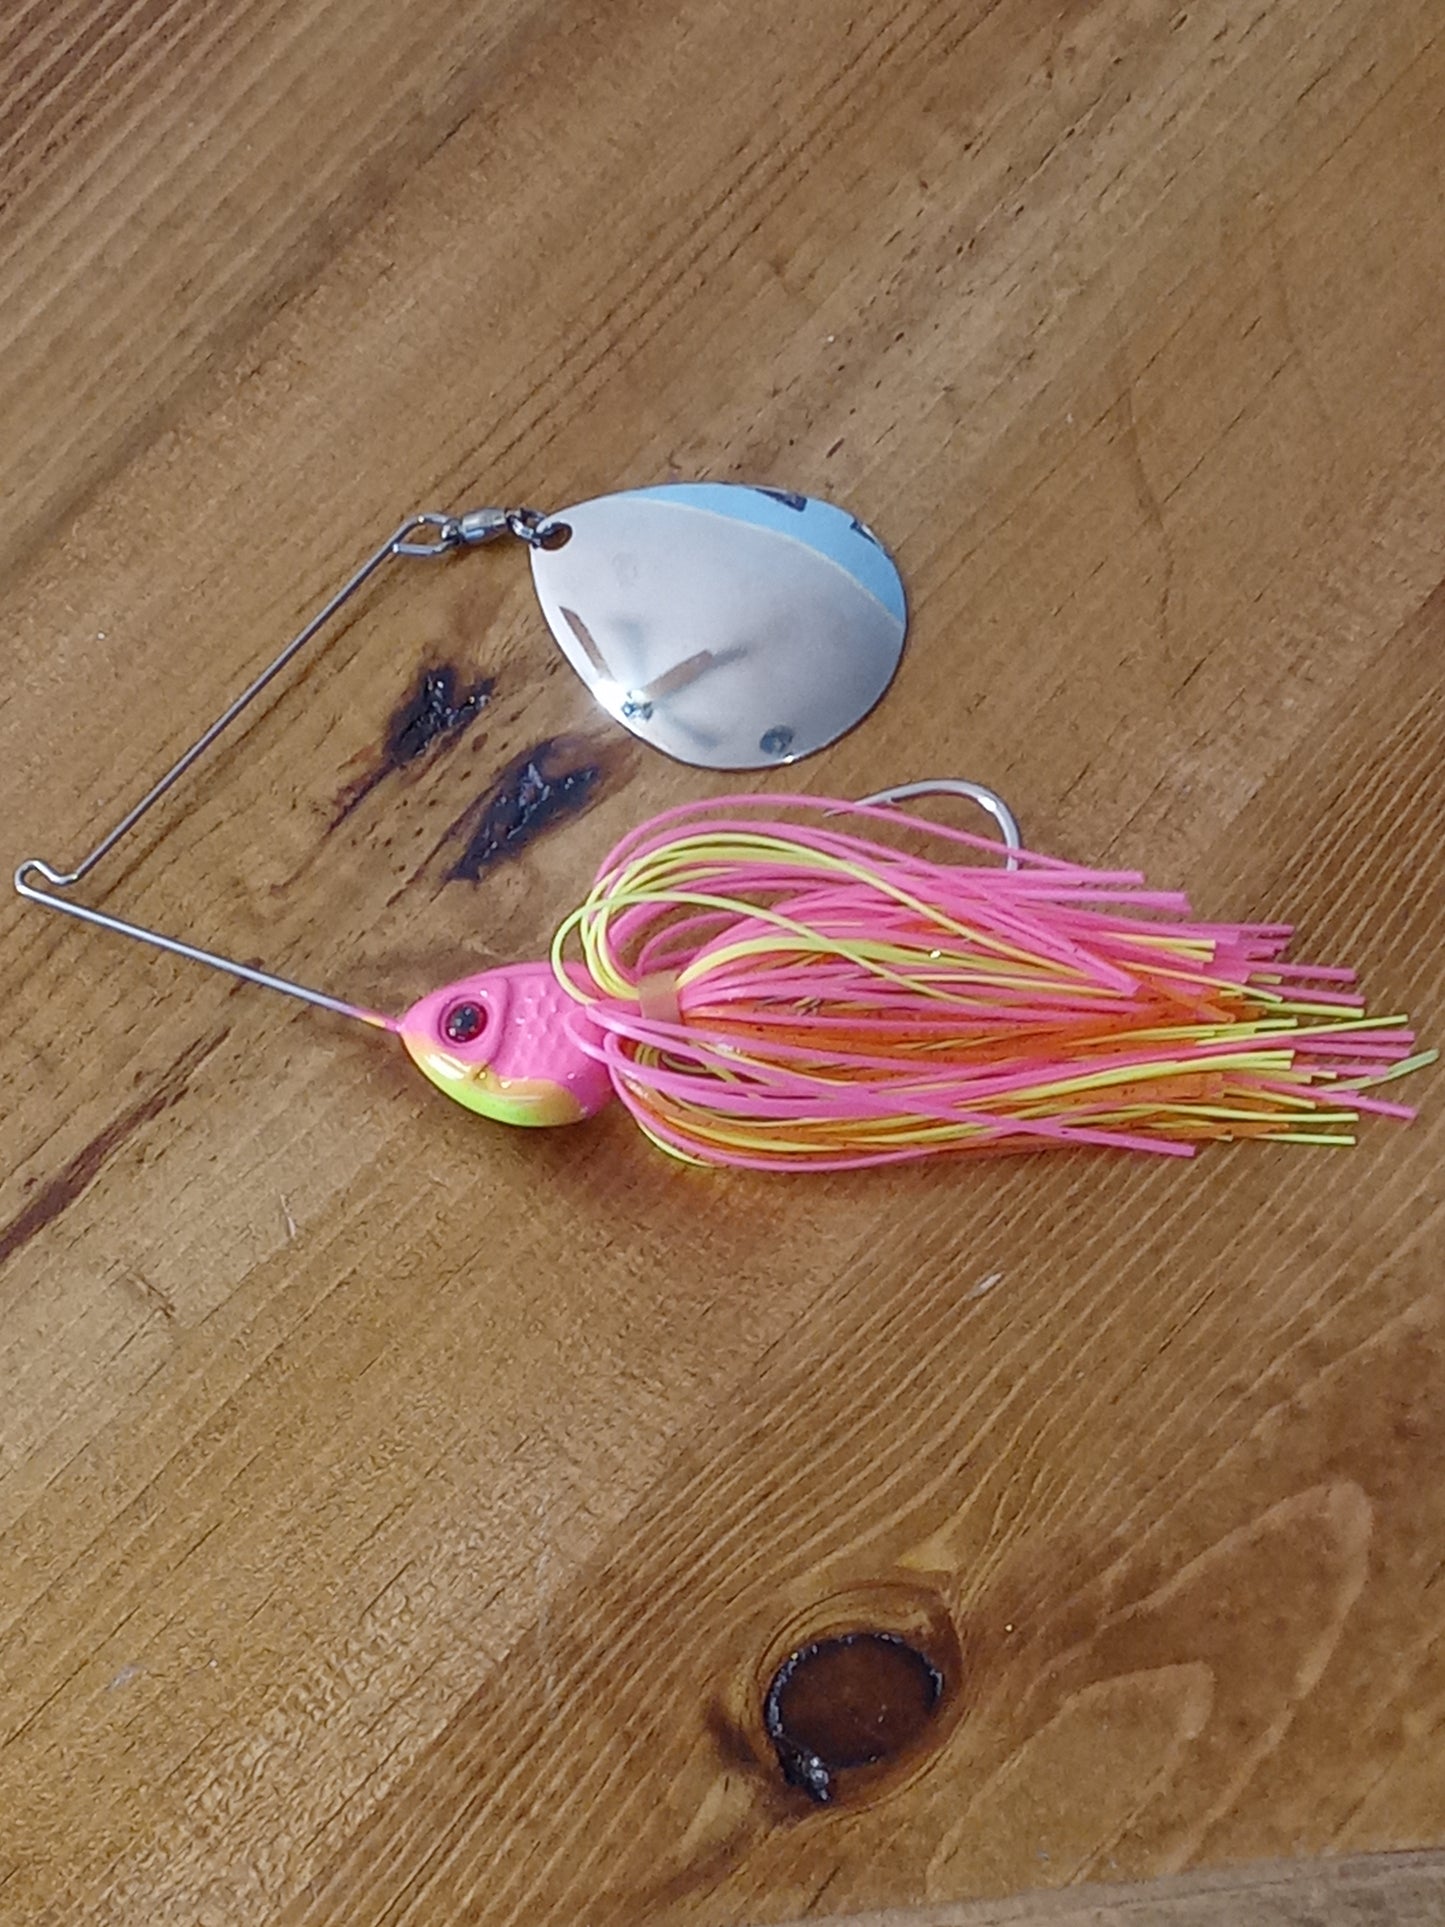 000 DHT New Nighttime Spinnerbaits